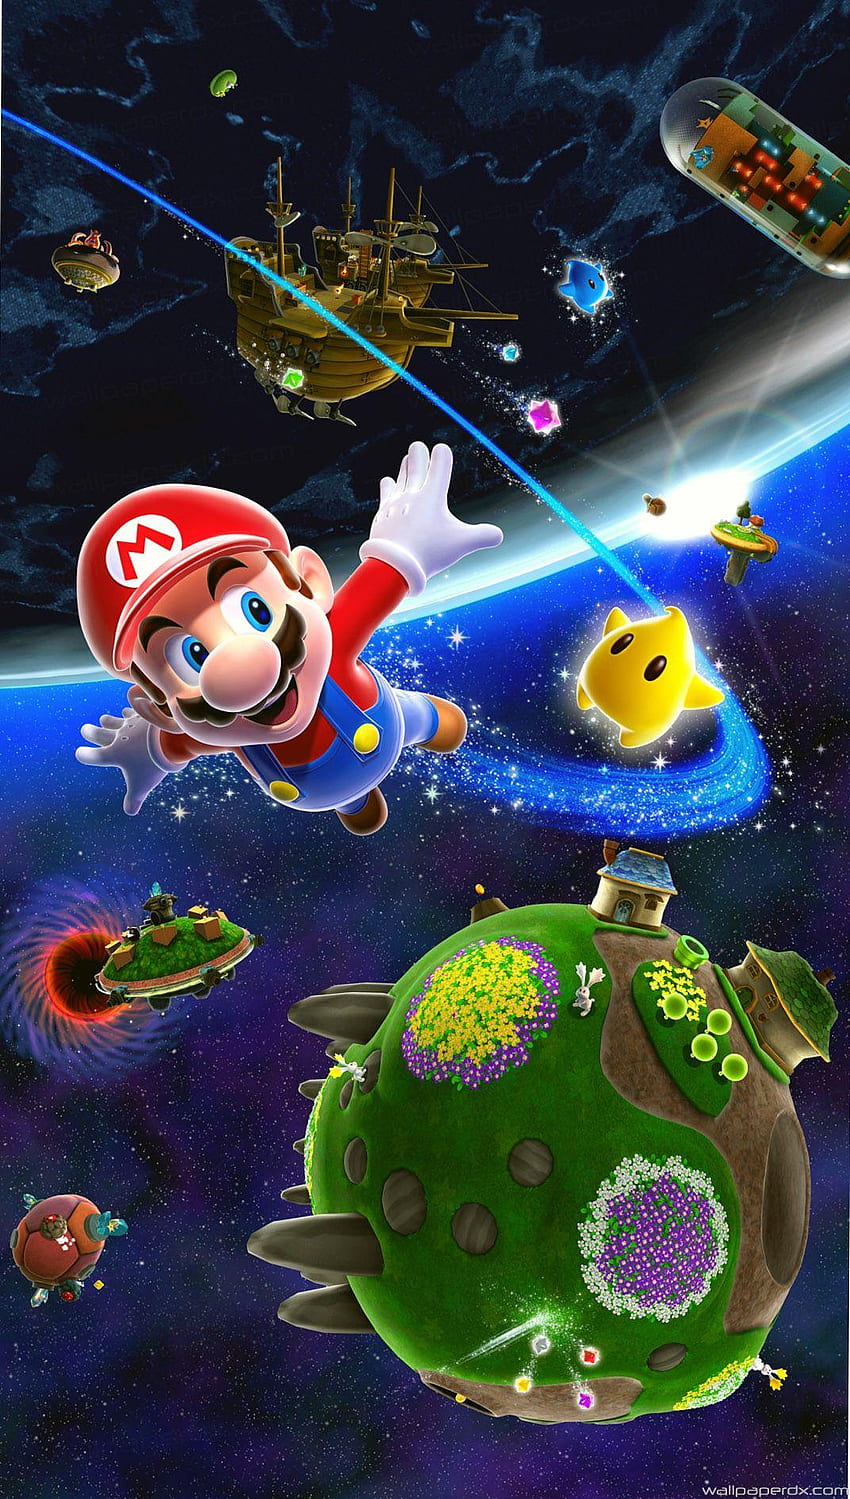 Download Feel nostalgic with the new Super Mario iPhone Wallpaper   Wallpaperscom